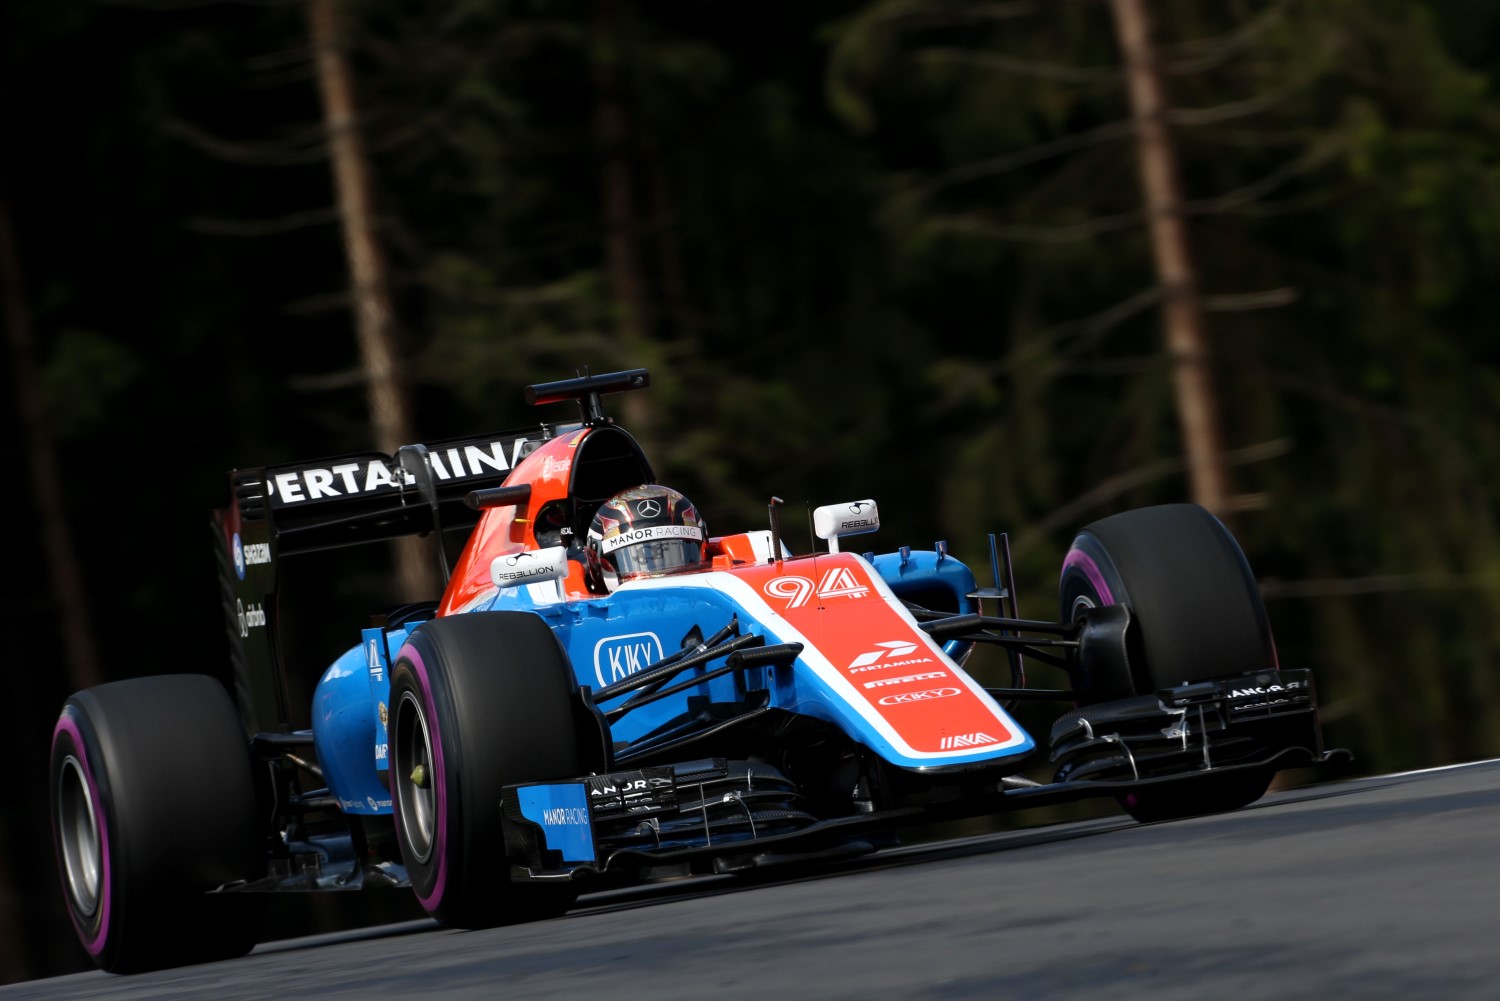 Manor is officially the Mercedes 'B' team now